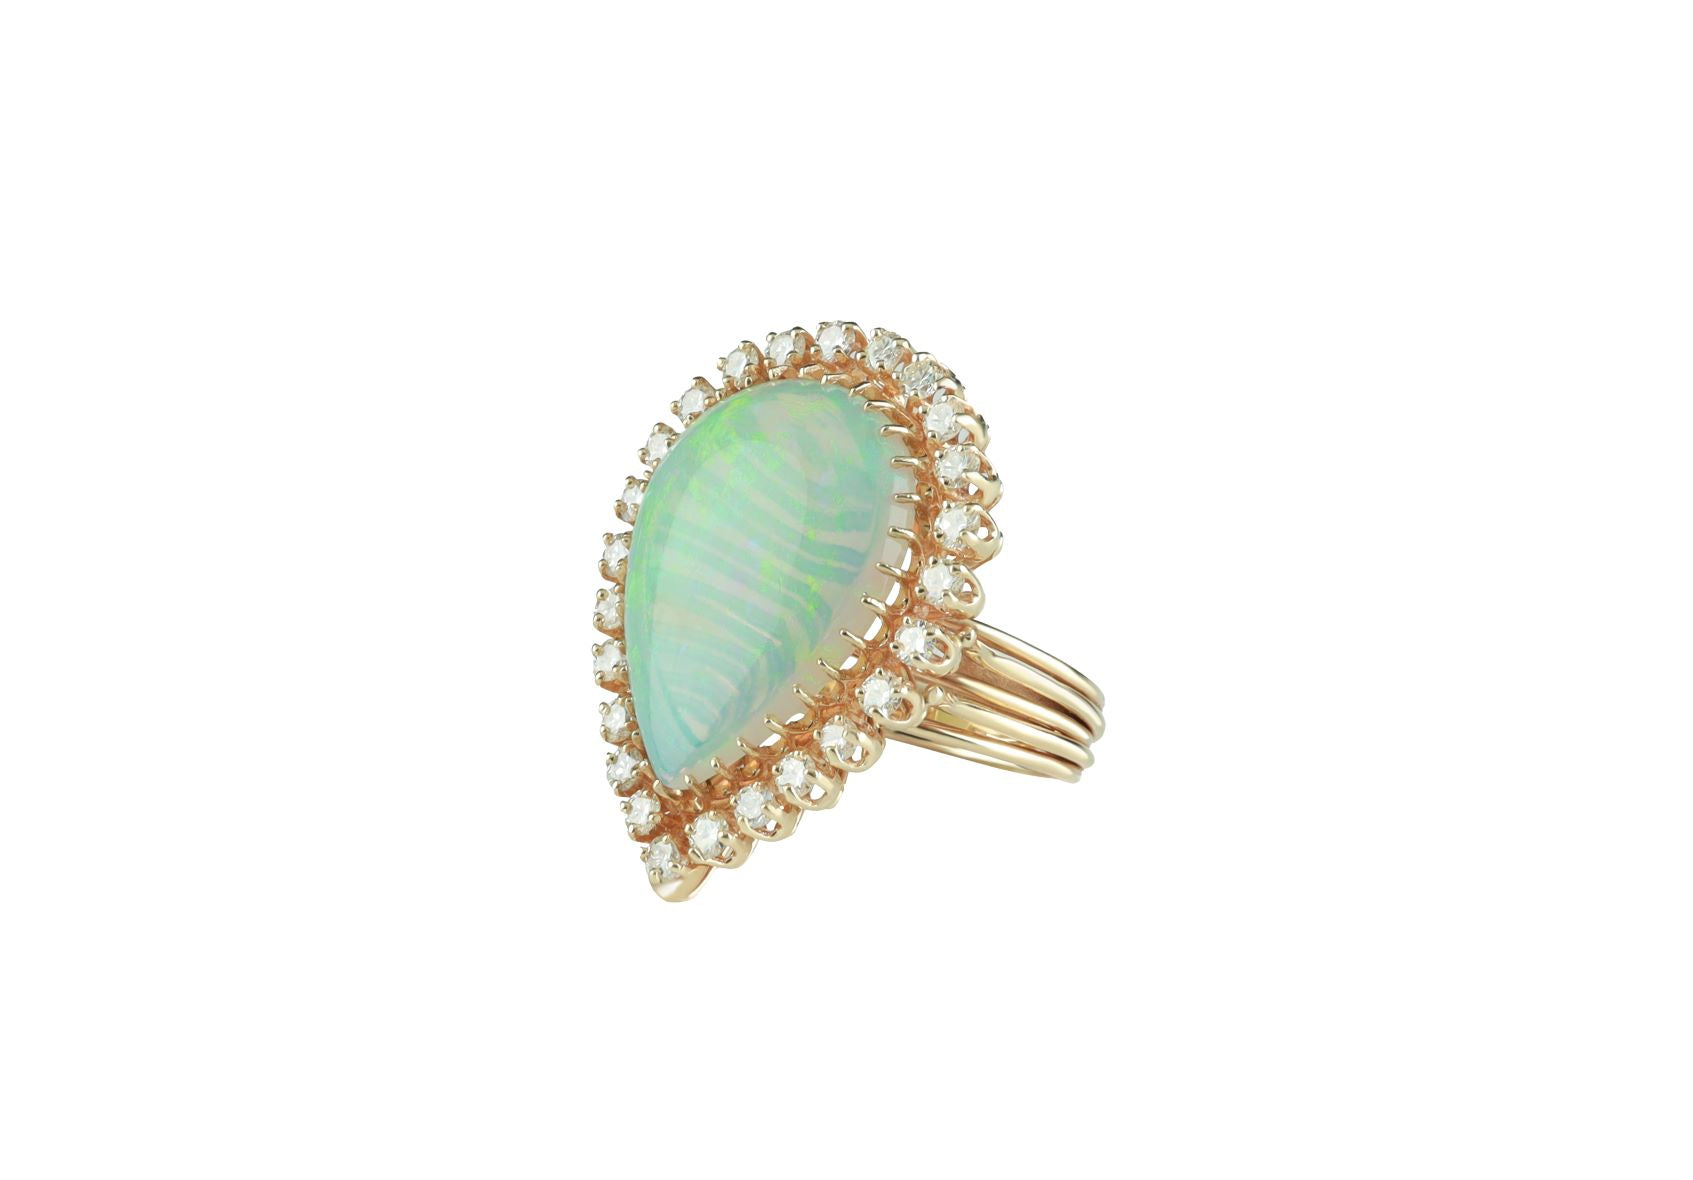 12 ct Opal Cabochon and Diamond Ring